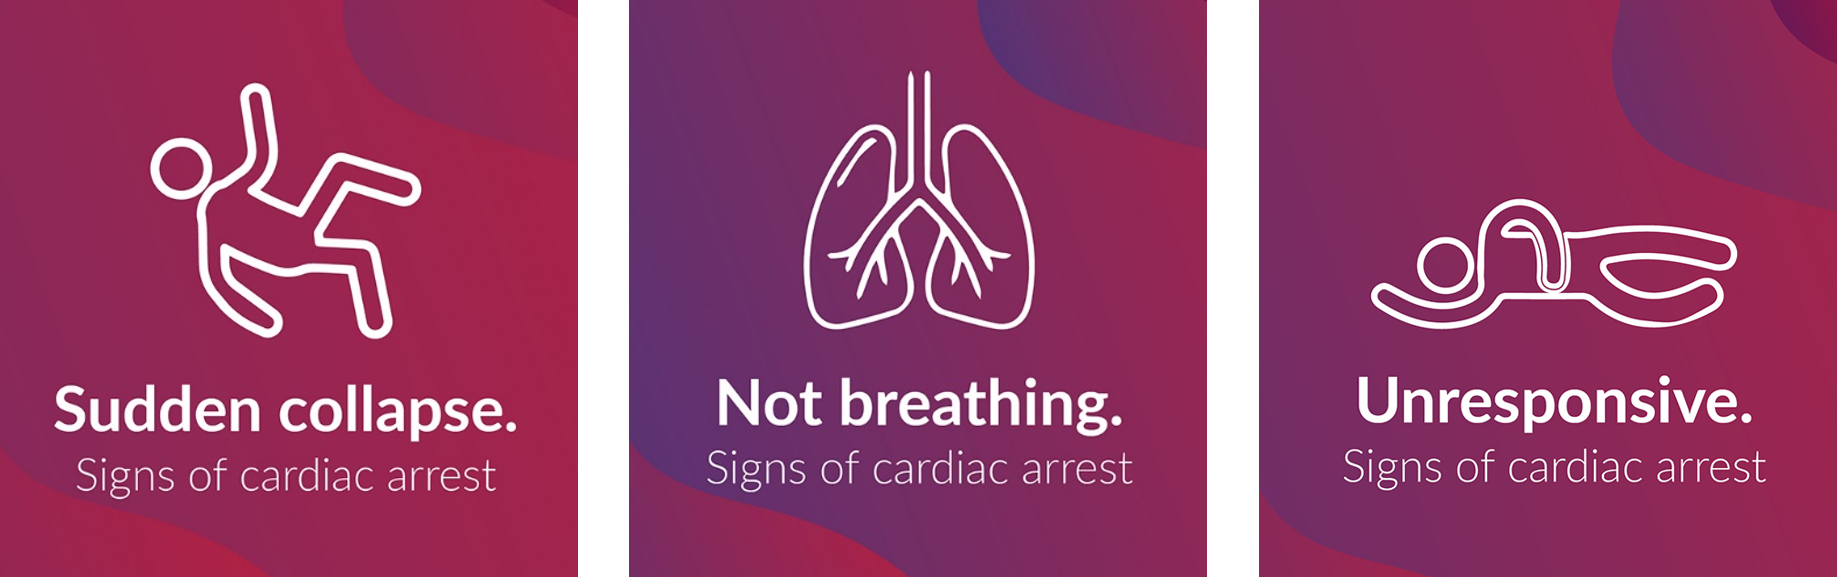 Signs of cardiac arrest: Sudden collapse; Not breathing; and Unresponsive.